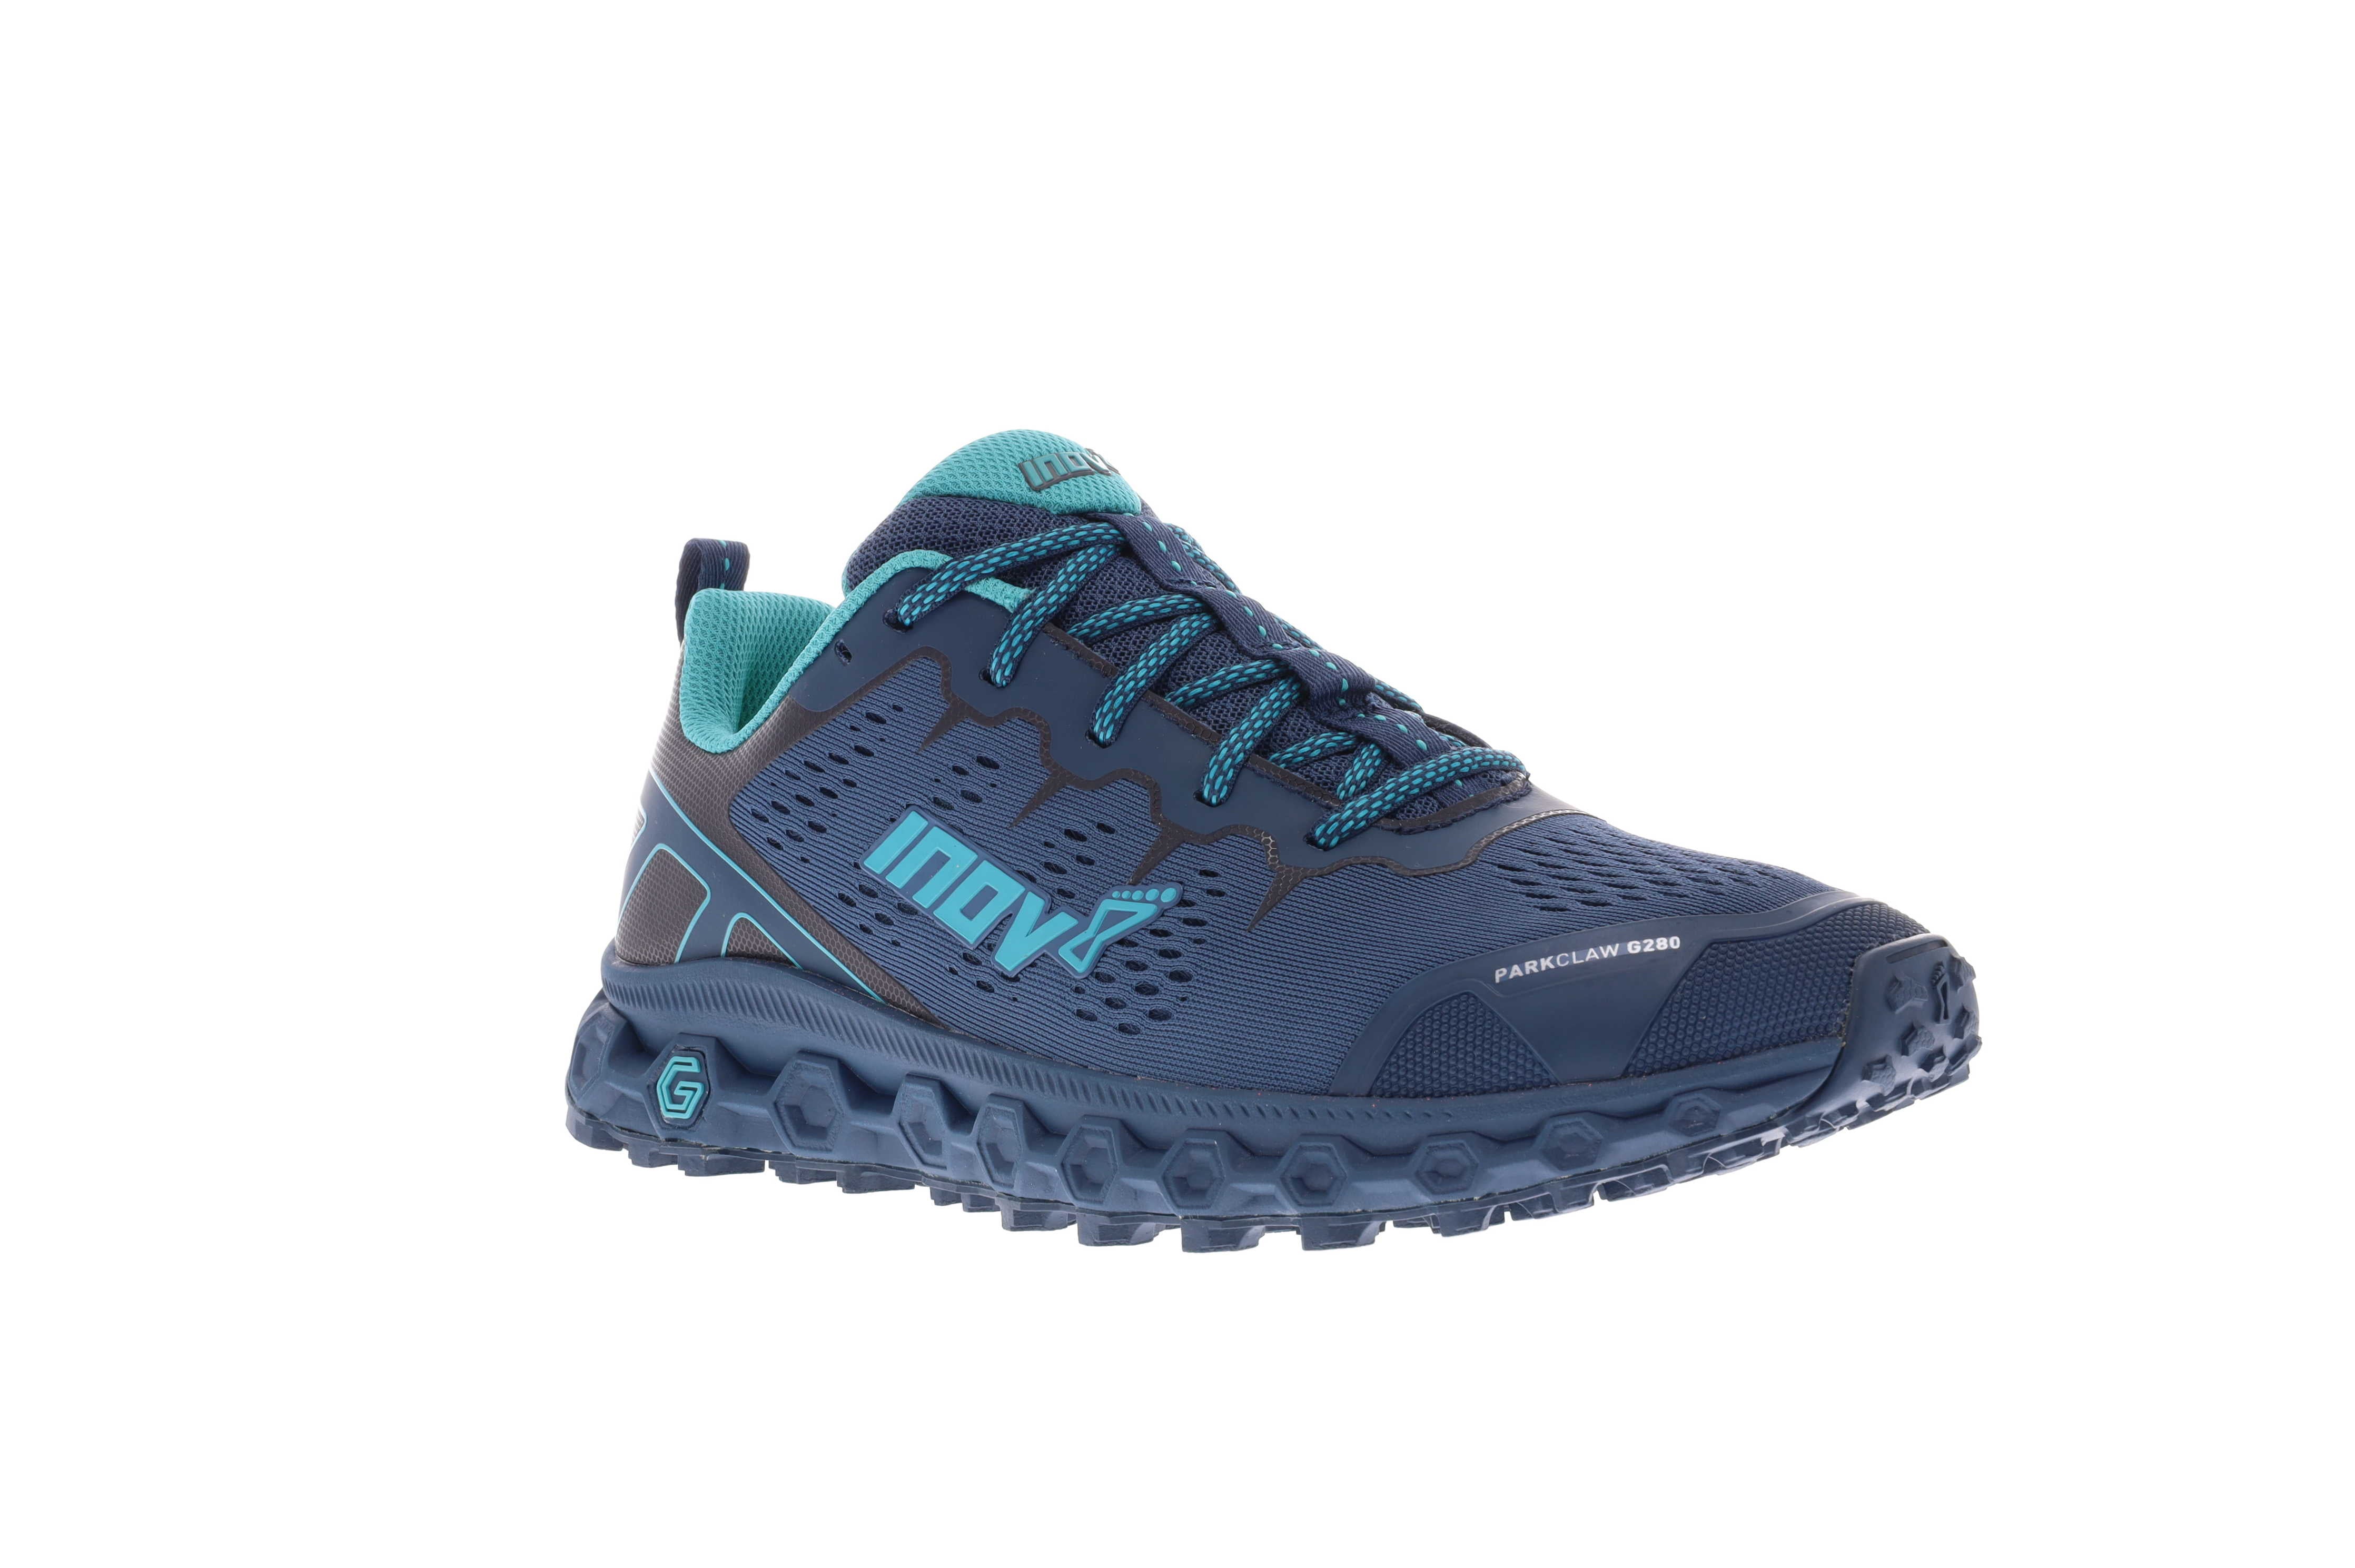 Women's Parkclaw G 280 Road to Trail Running Shoe